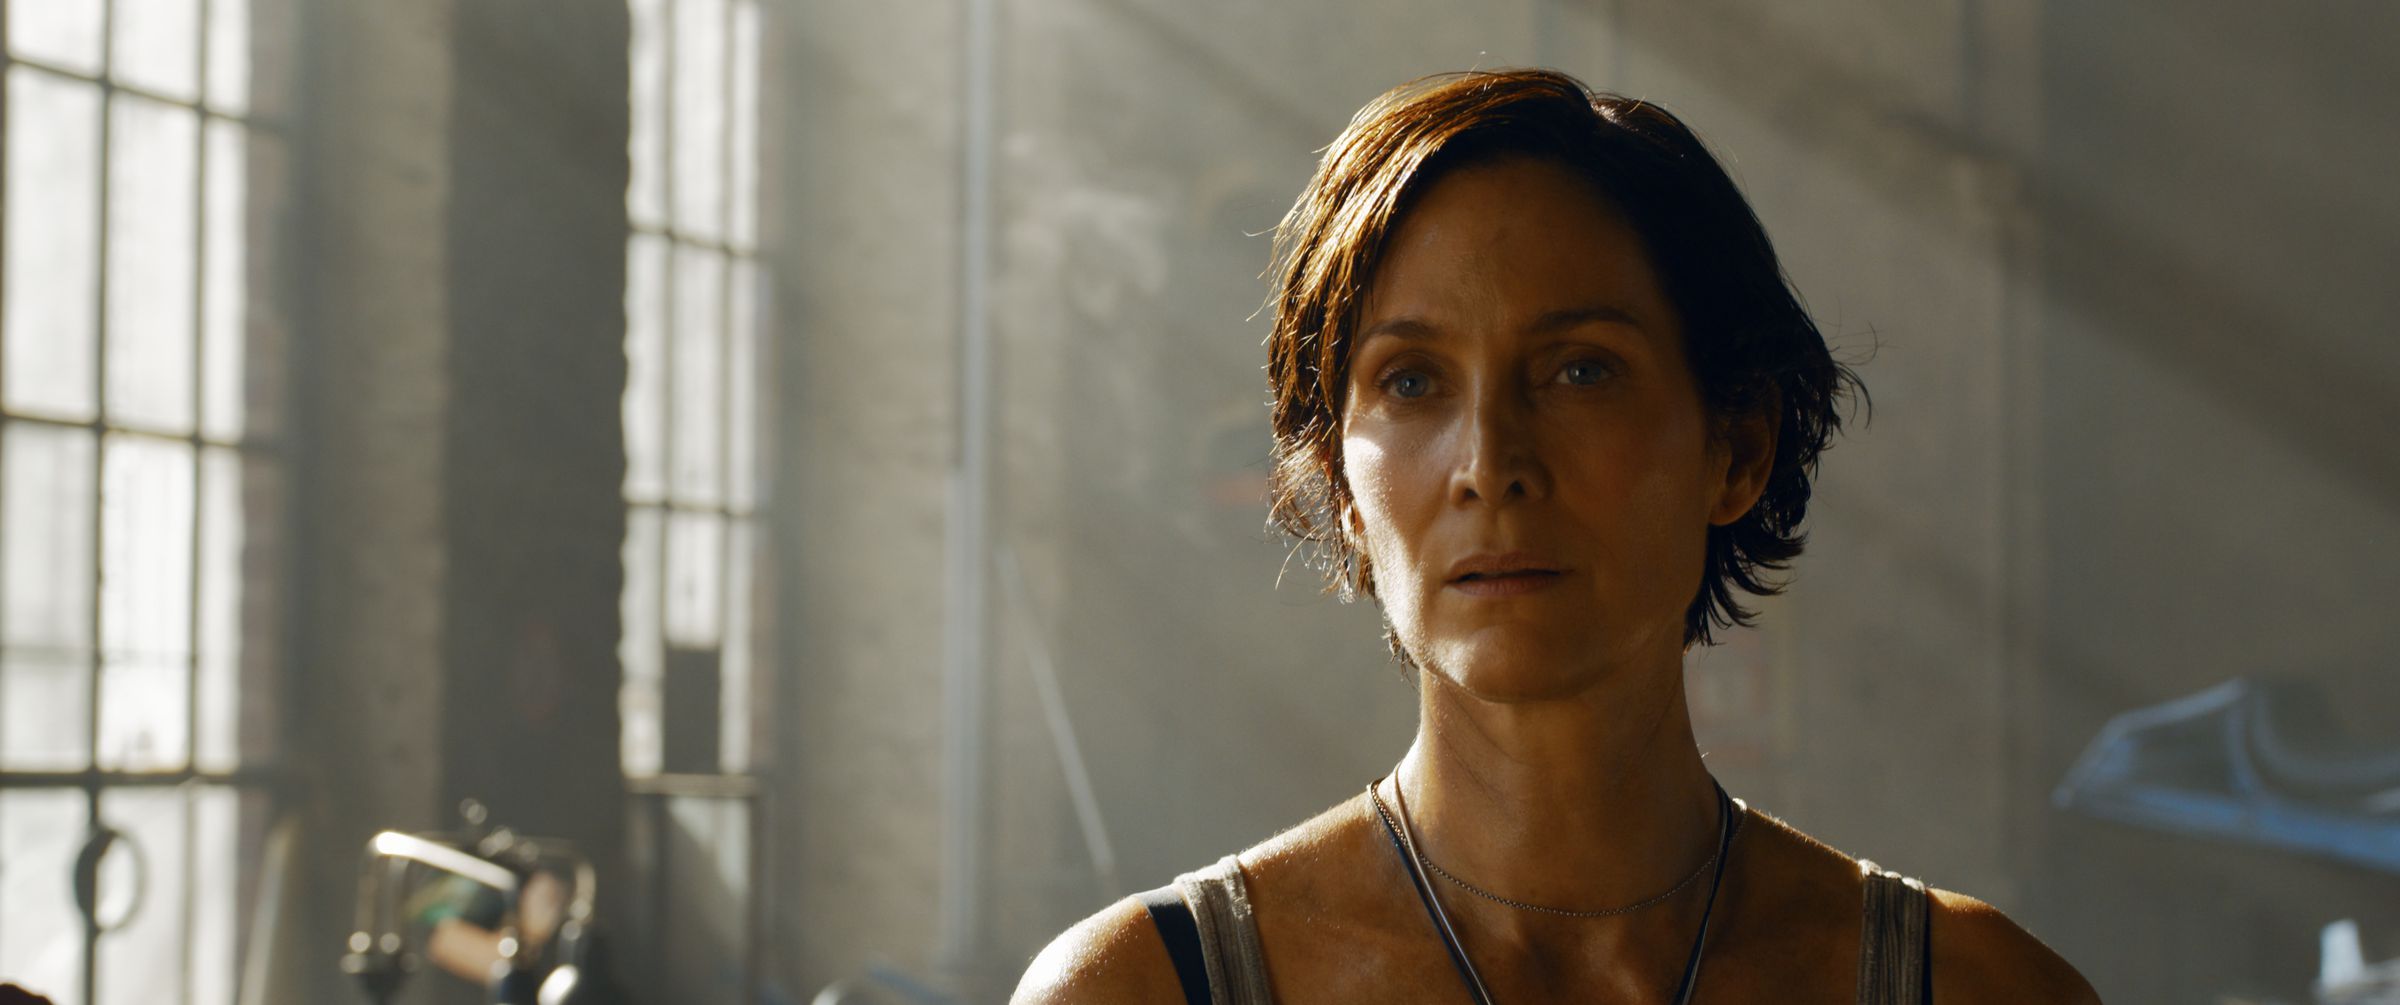 Carrie-Anne Moss in The Matrix Resurrections